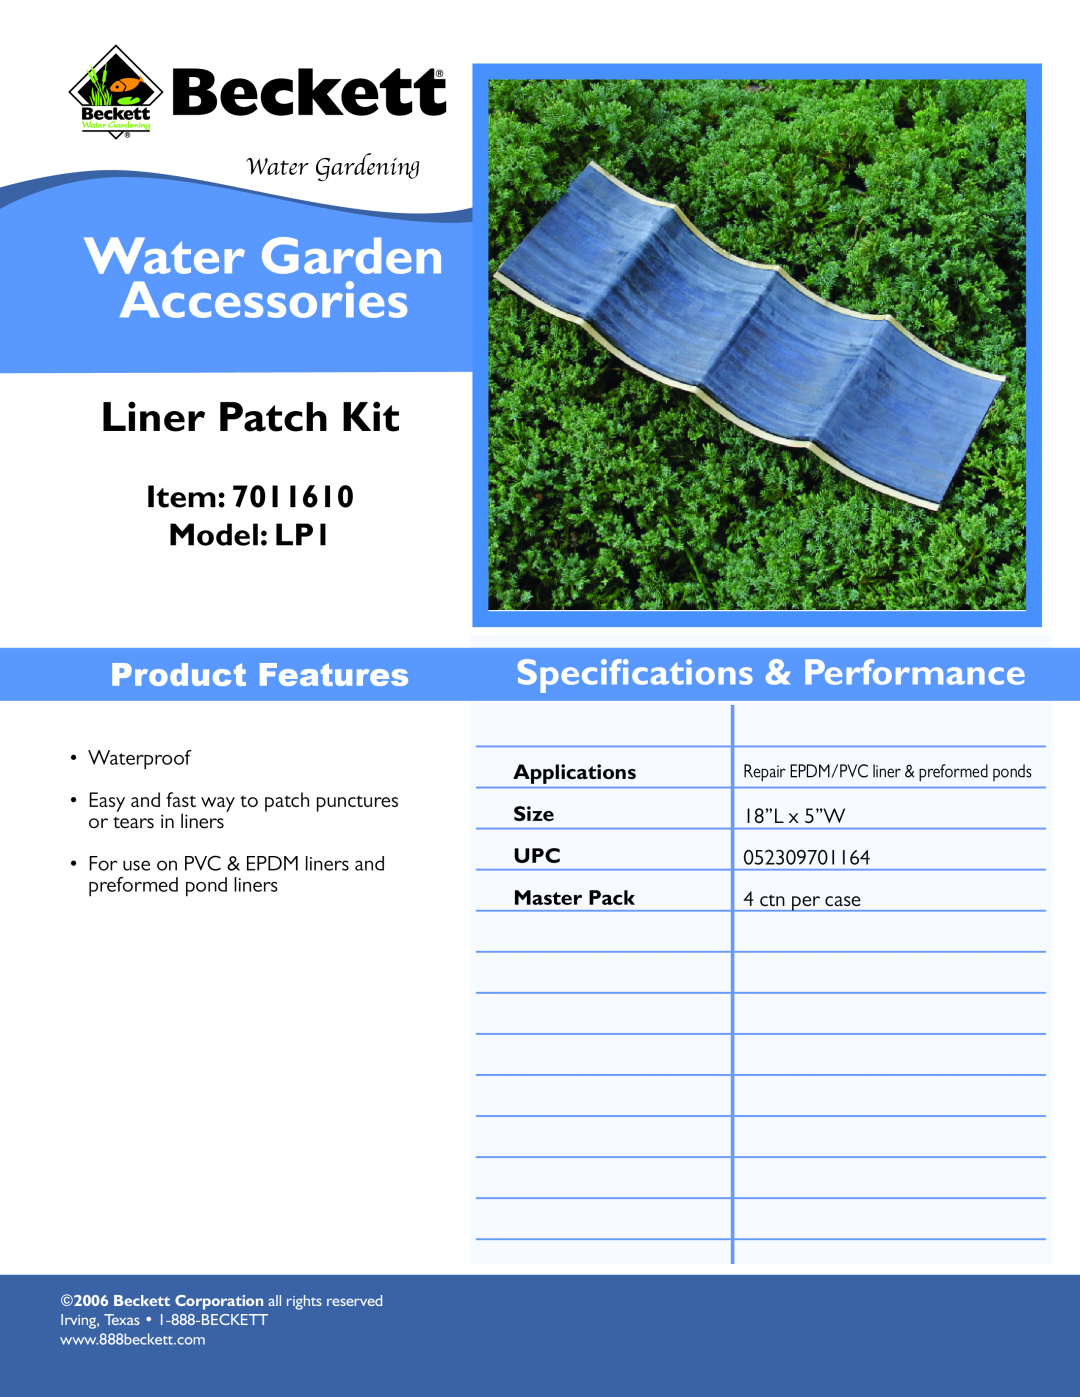 Beckett Water Gardening LP1 specifications Water Garden Accessories, Liner Patch Kit, Speciﬁcations & Performance, Size 